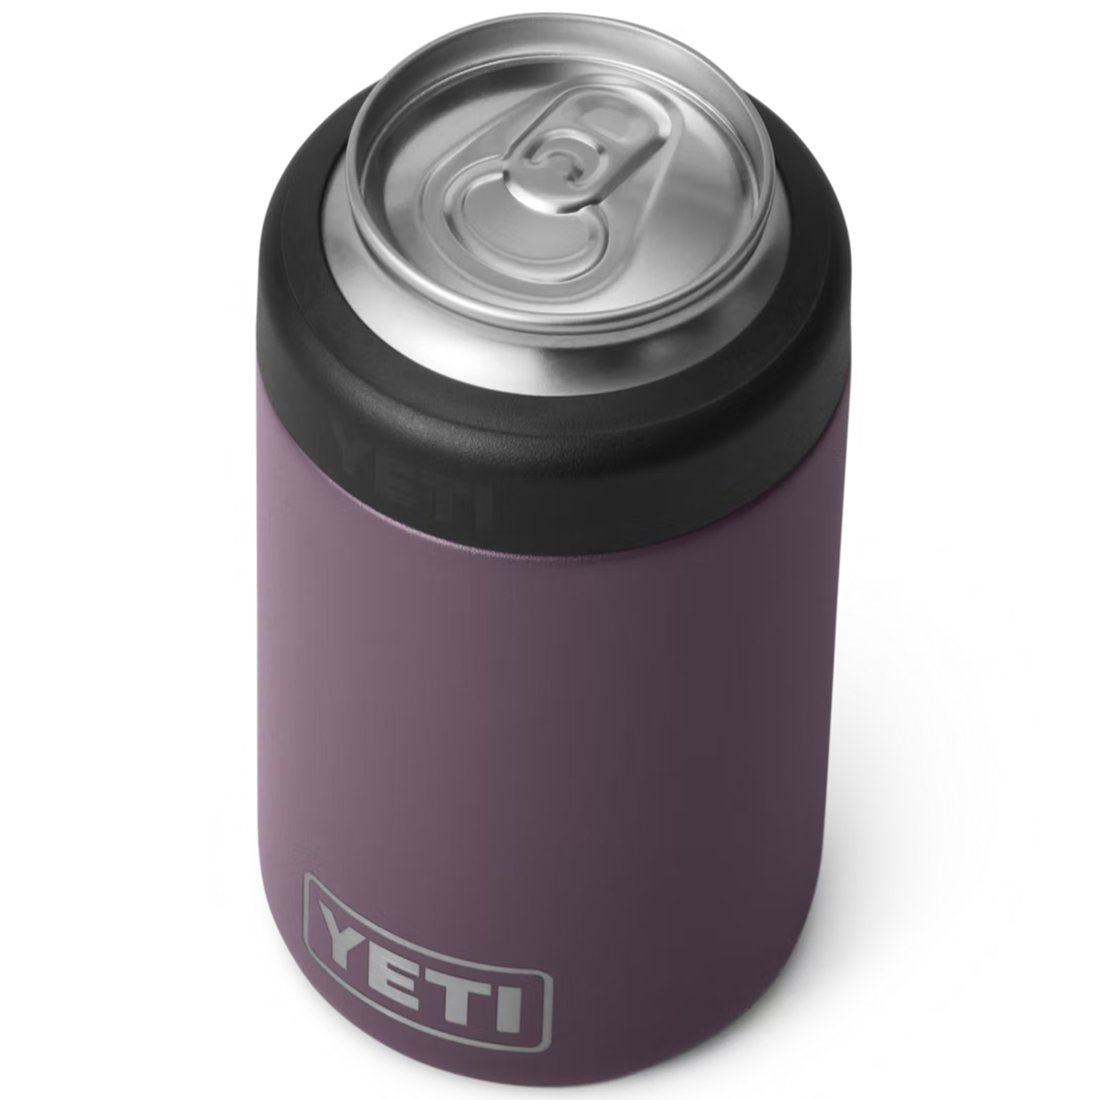 Yeti Rambler Colster 2.0 Cooler Can Extender 473ml / 16oz NOW in 5 Colours  